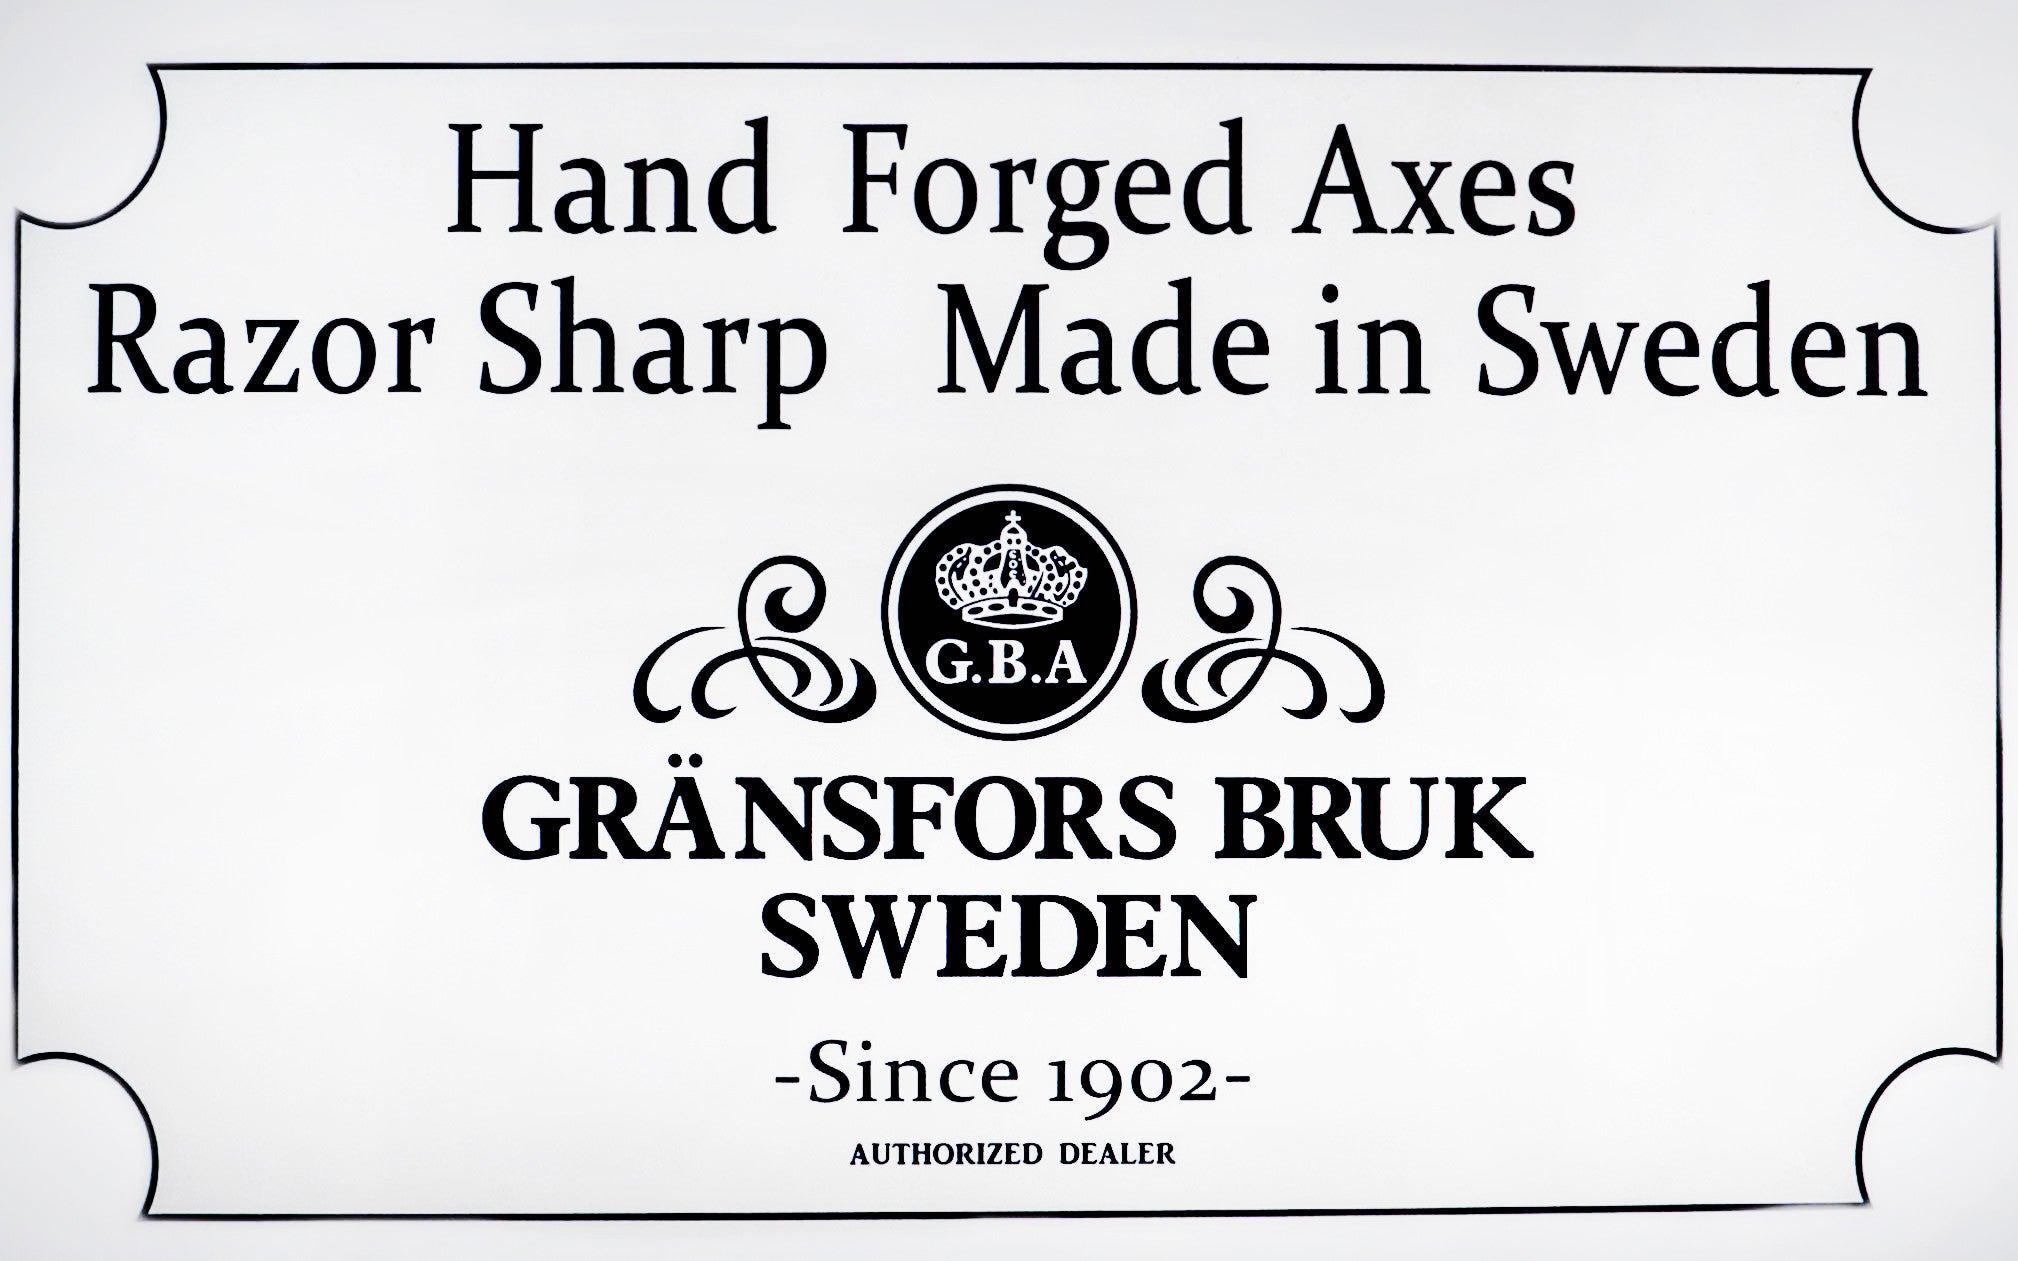 Hand Forged Axes ~ Gransfors Bruk of Sweden 